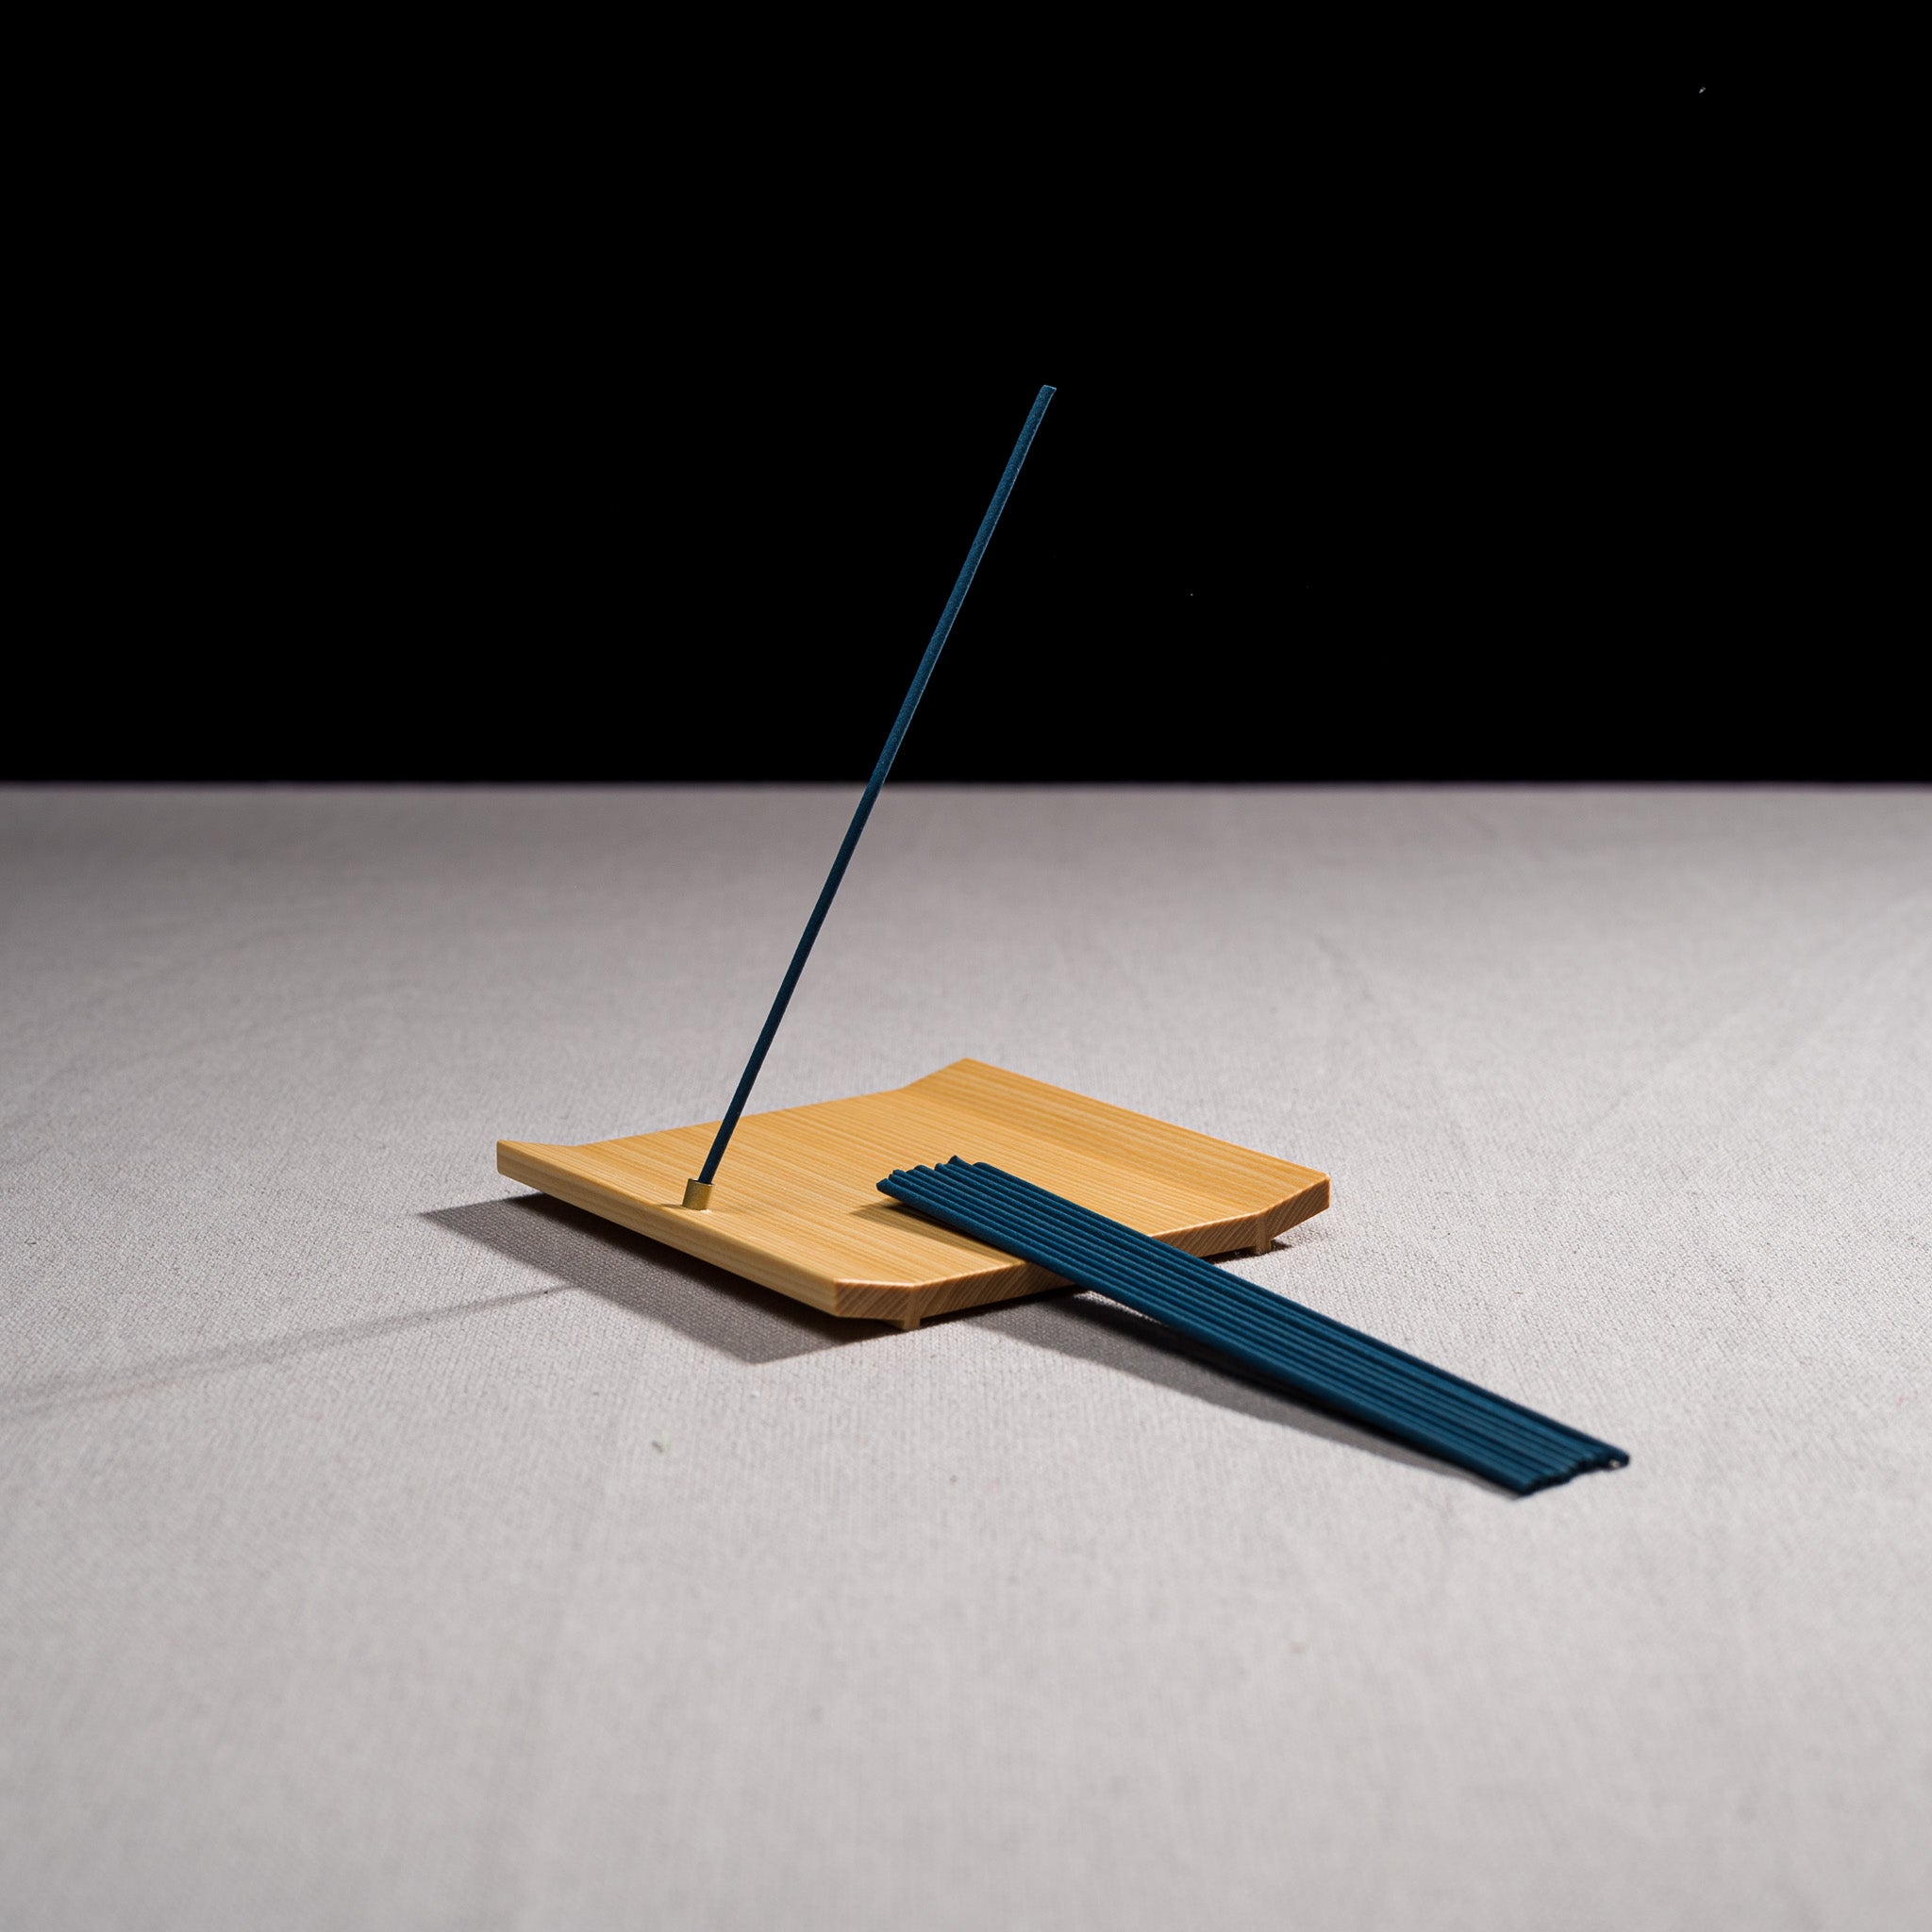 Daily Incense Stand - Wooden Square - Two Kinds